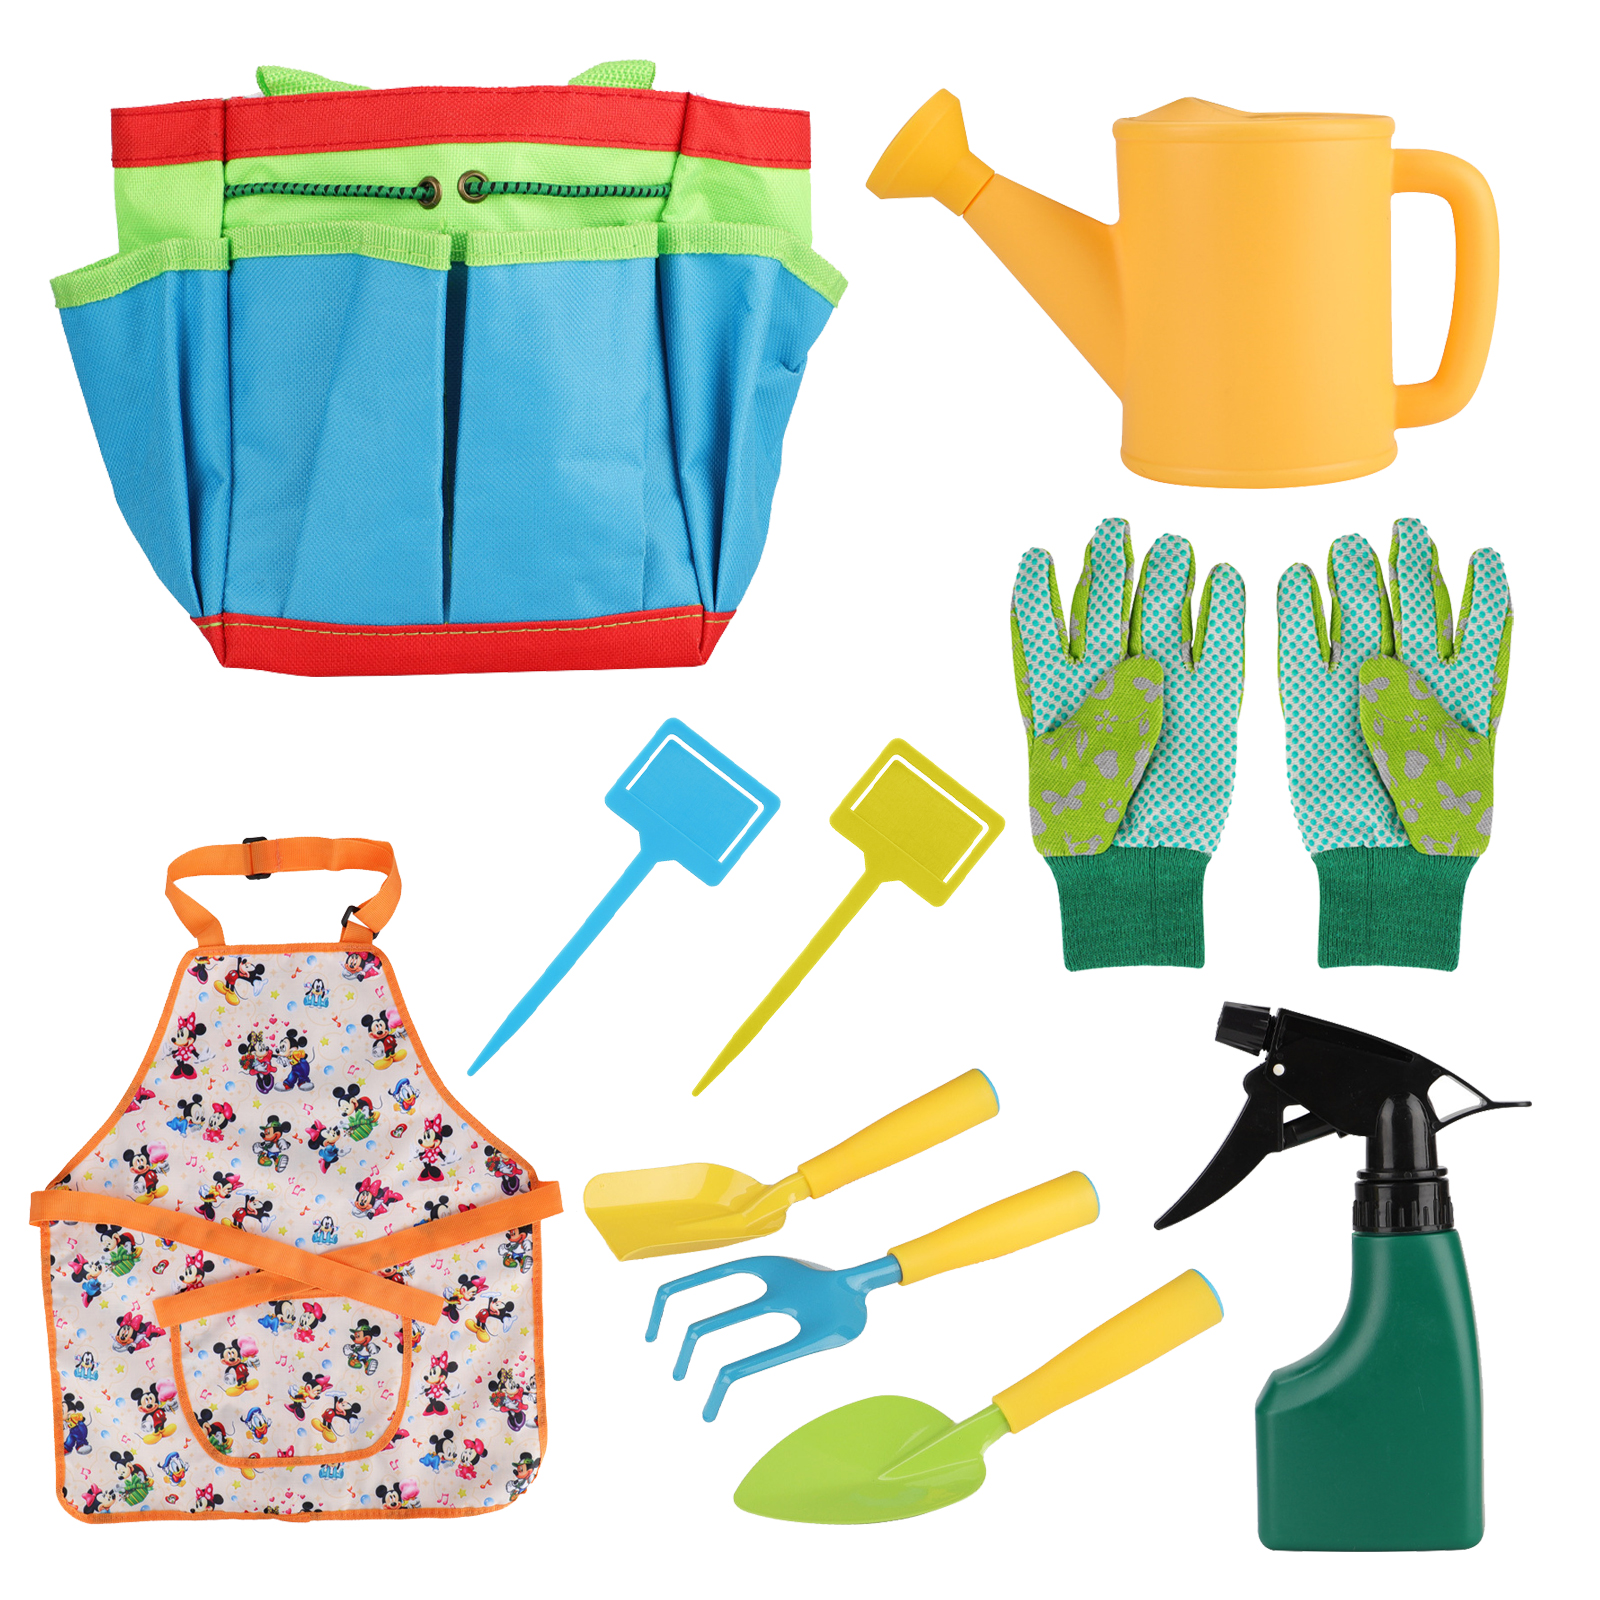 Fork Gloves and Apron Fun Little Toy 12 PCs Kids Gardening Tool Set Rake Outdoor Toys for Kids Includes Shovel 